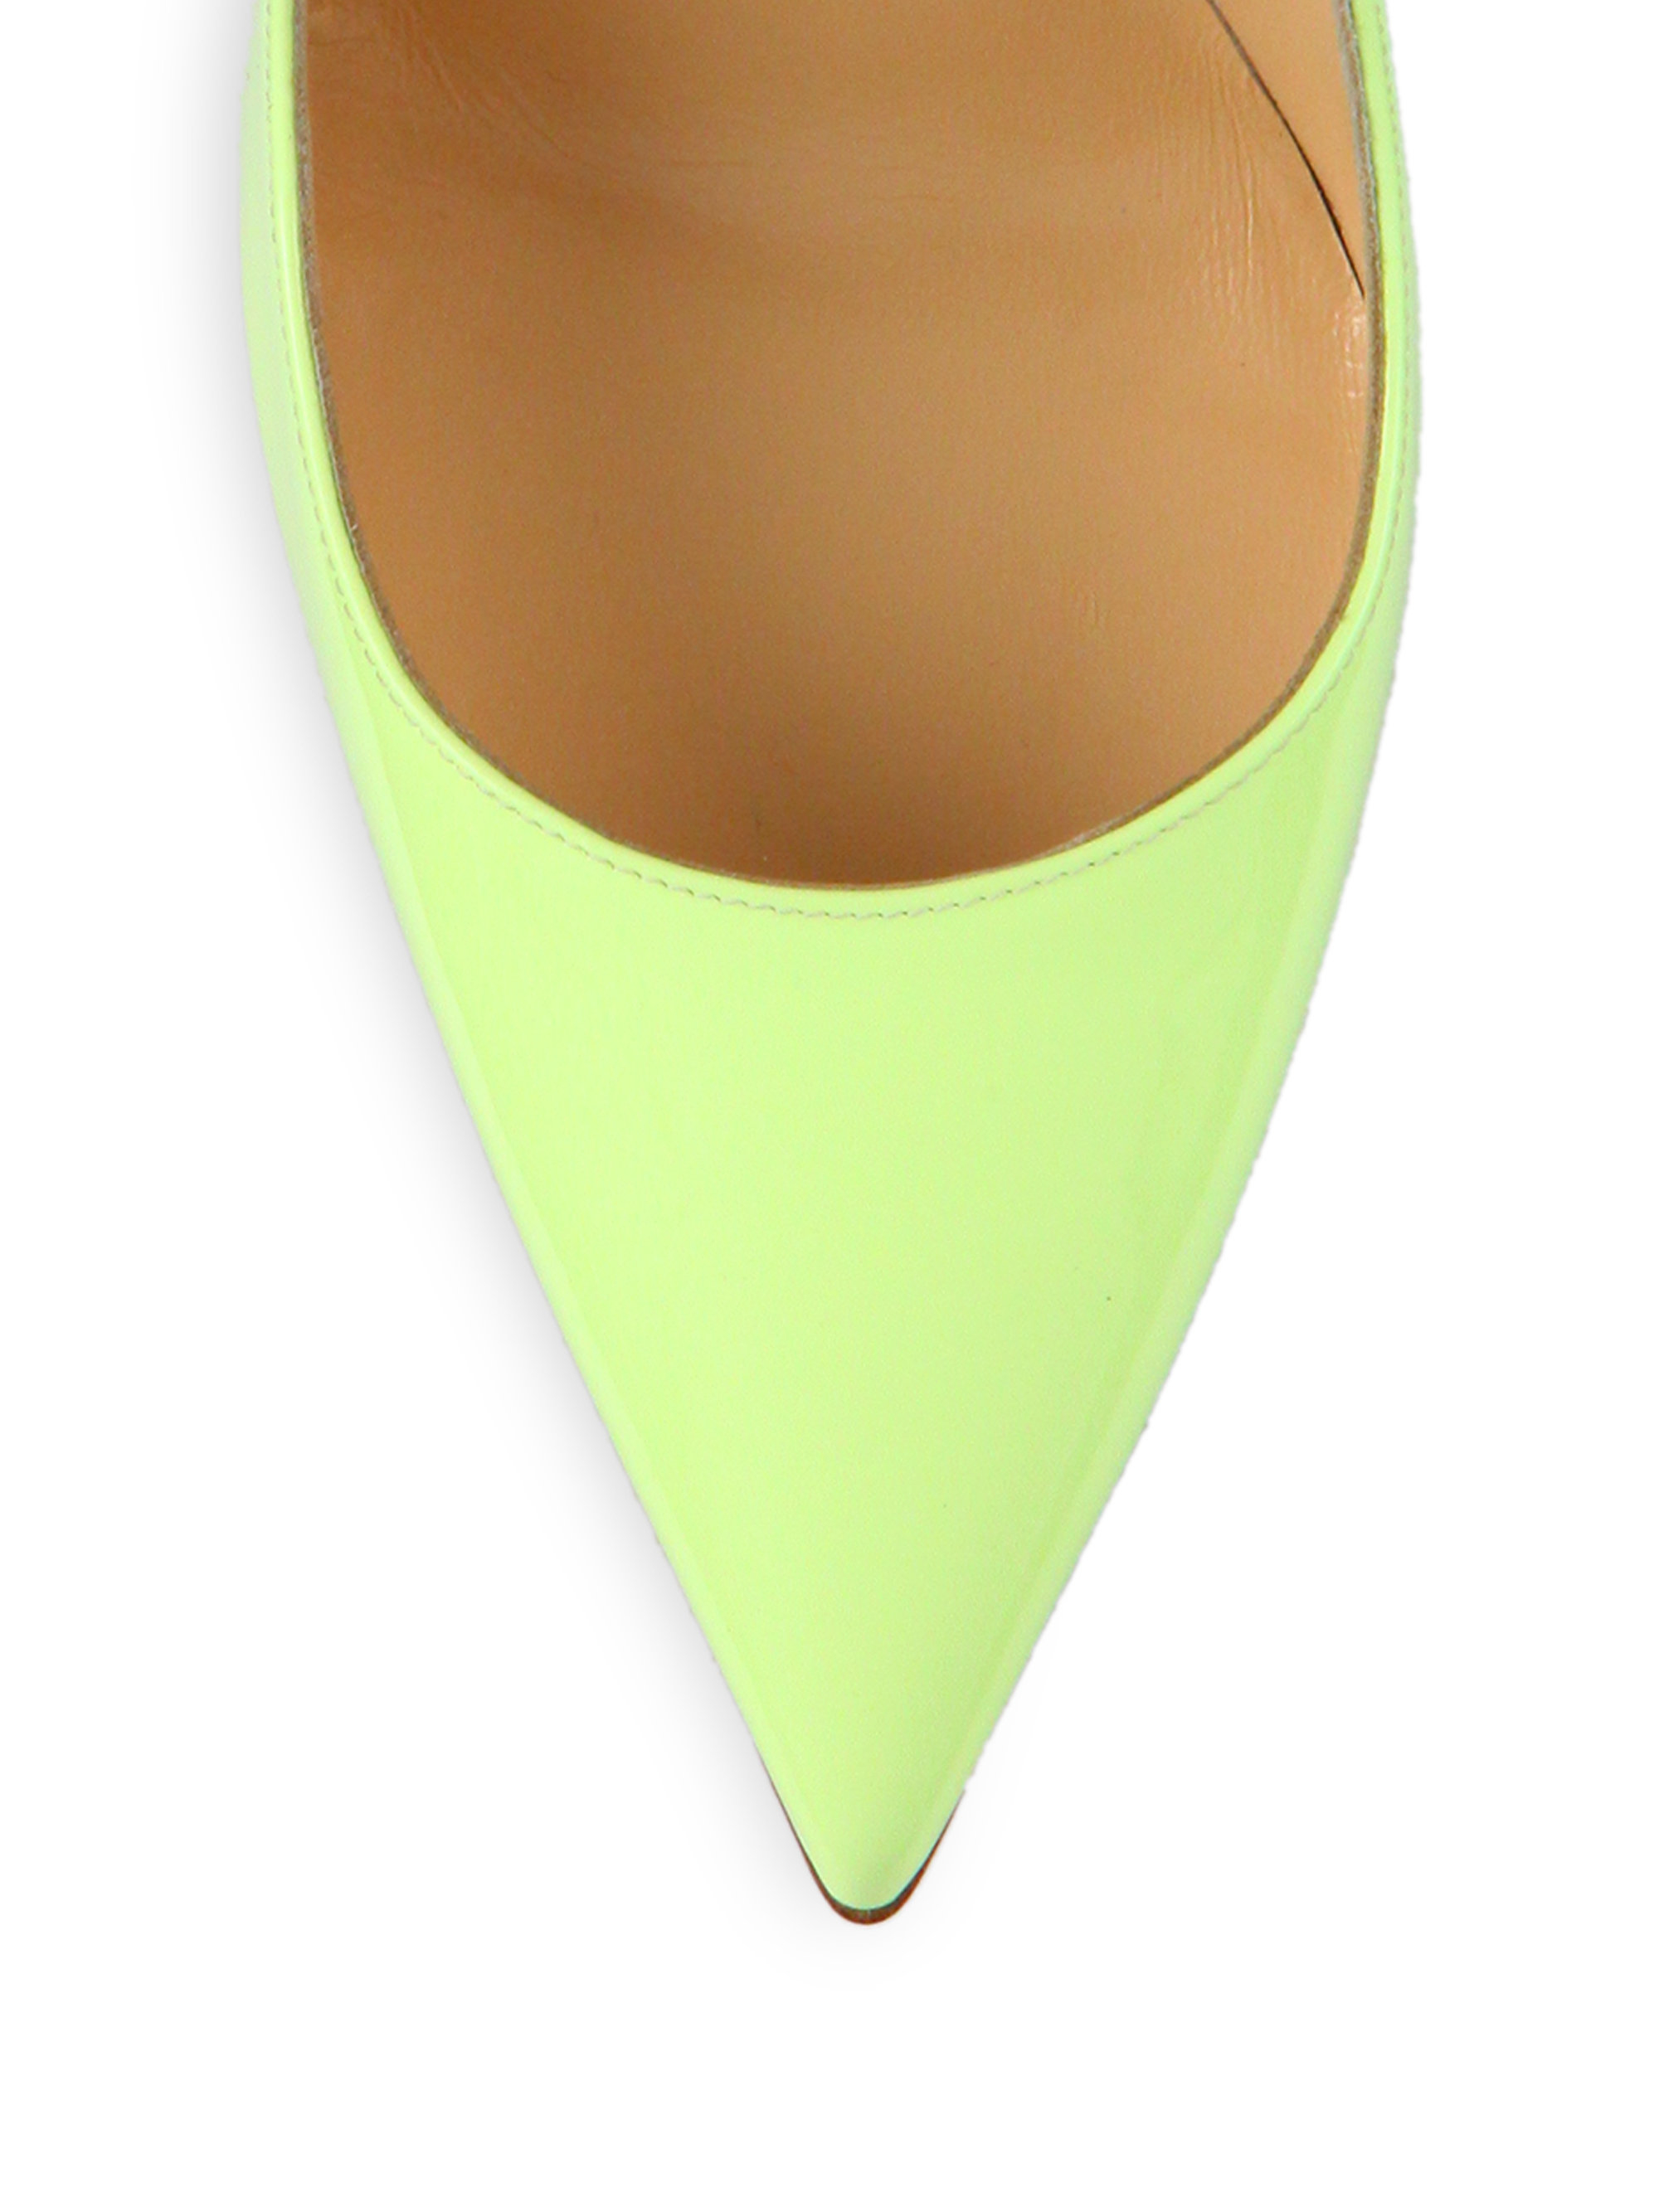 vuitton mens shoes - christian louboutin pointed-toe pumps Green patent leather | The ...